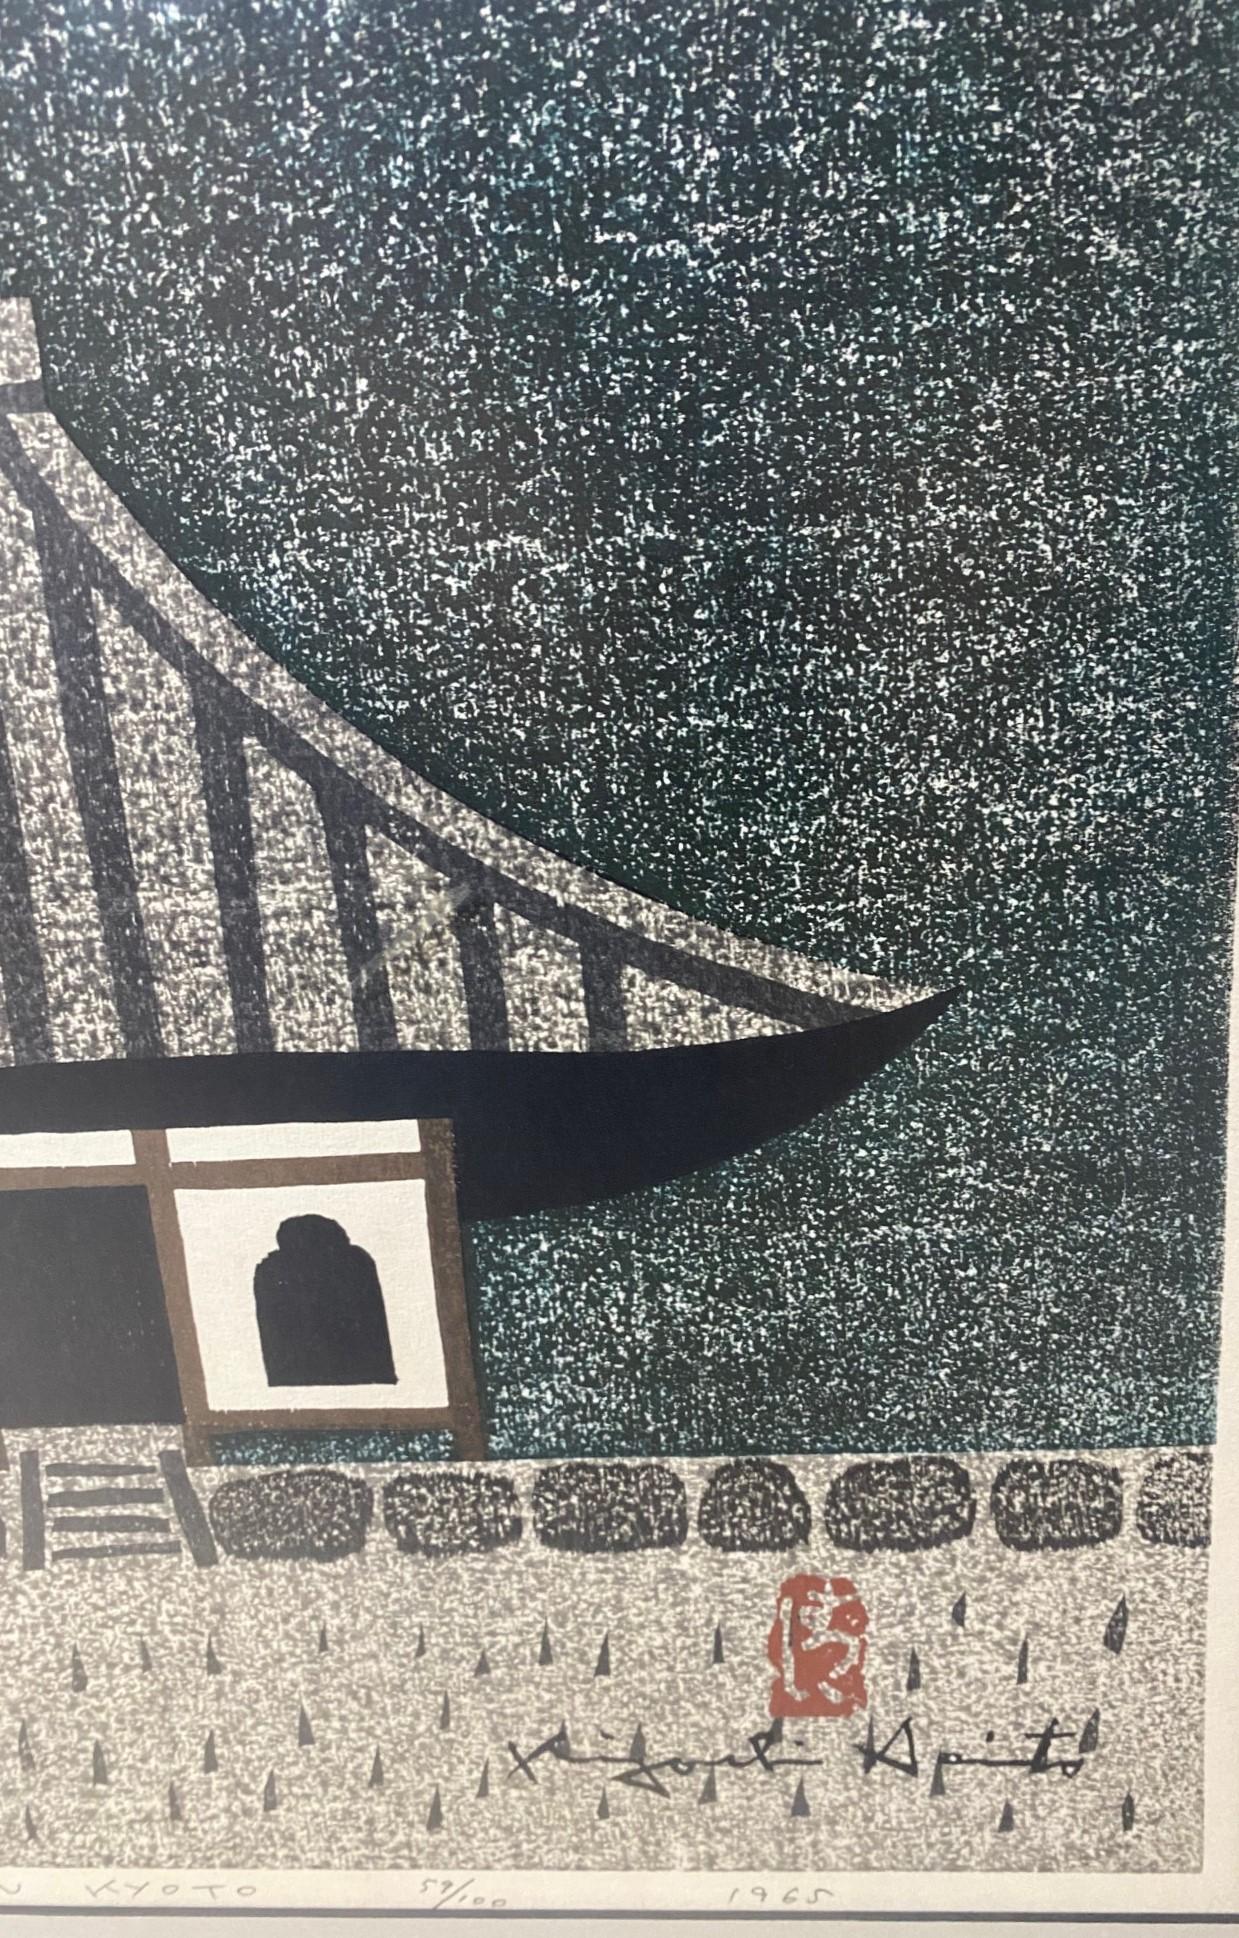 Kiyoshi Saito Signed Limited Edition Japanese Woodblock Print Syoren-In Kyoto In Good Condition For Sale In Studio City, CA